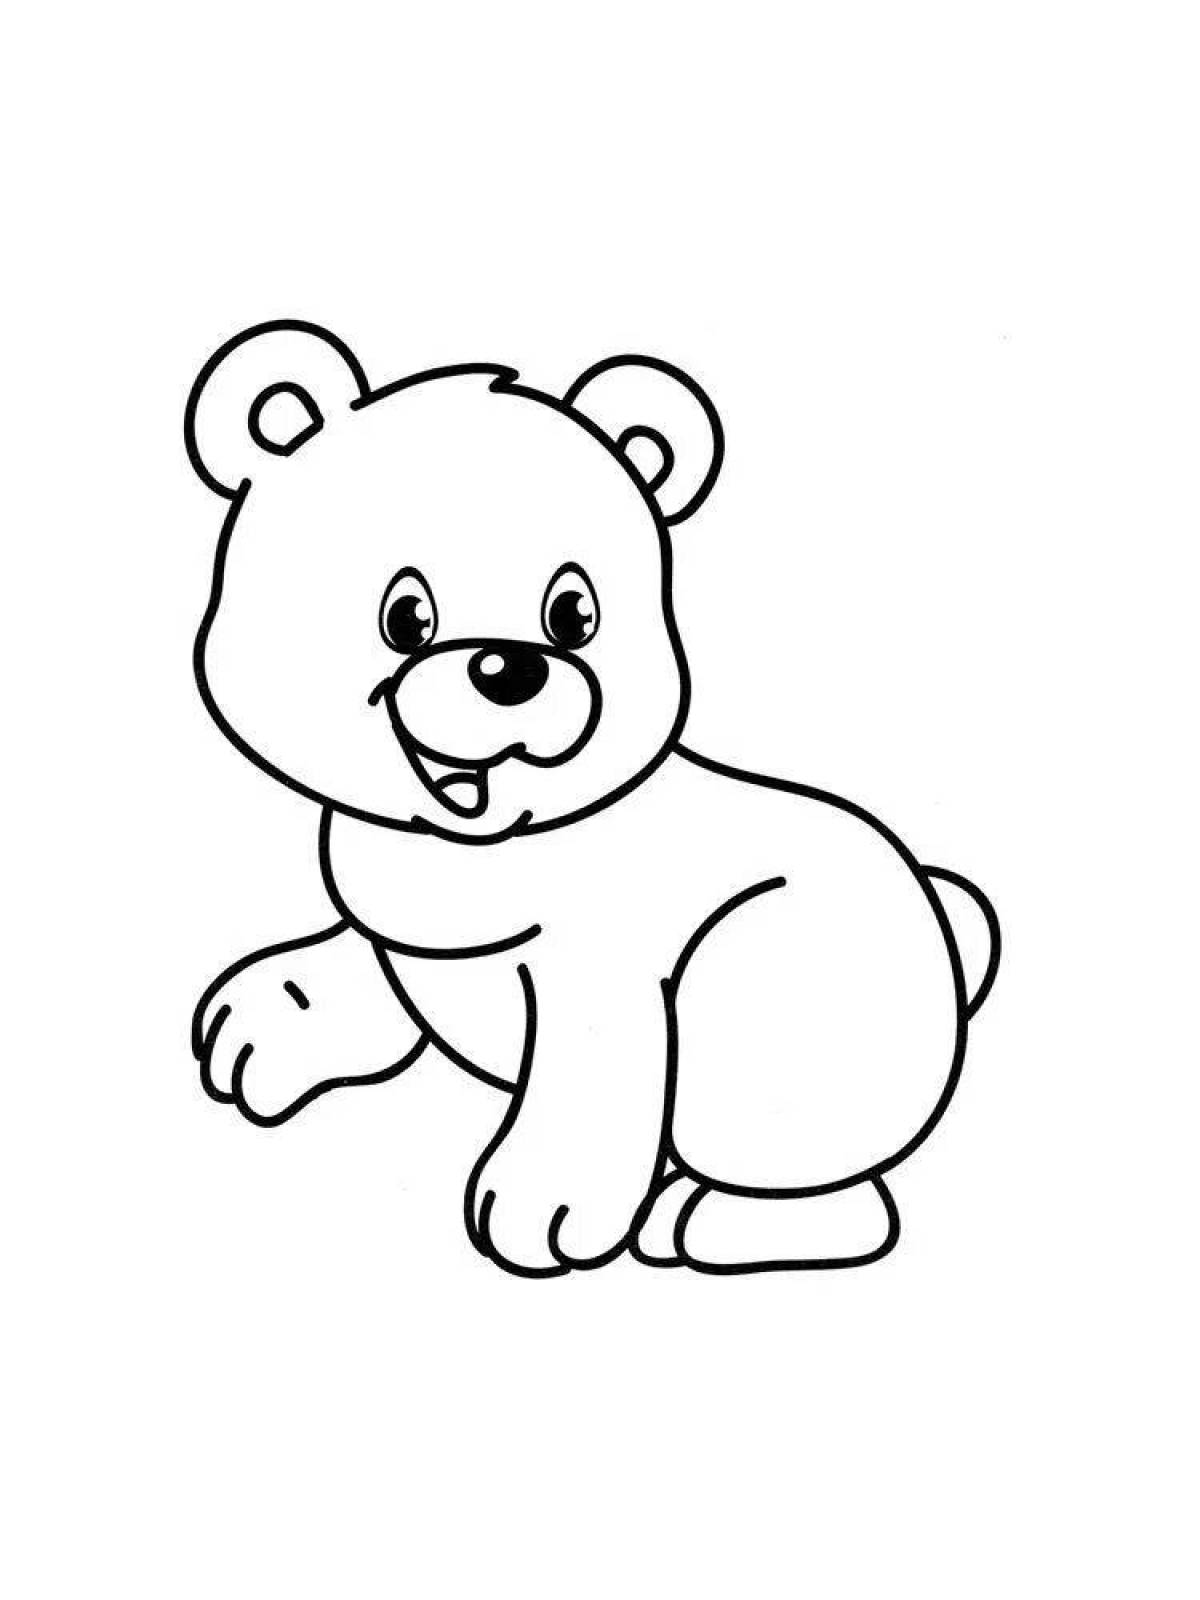 Happy teddy bear coloring book for kids